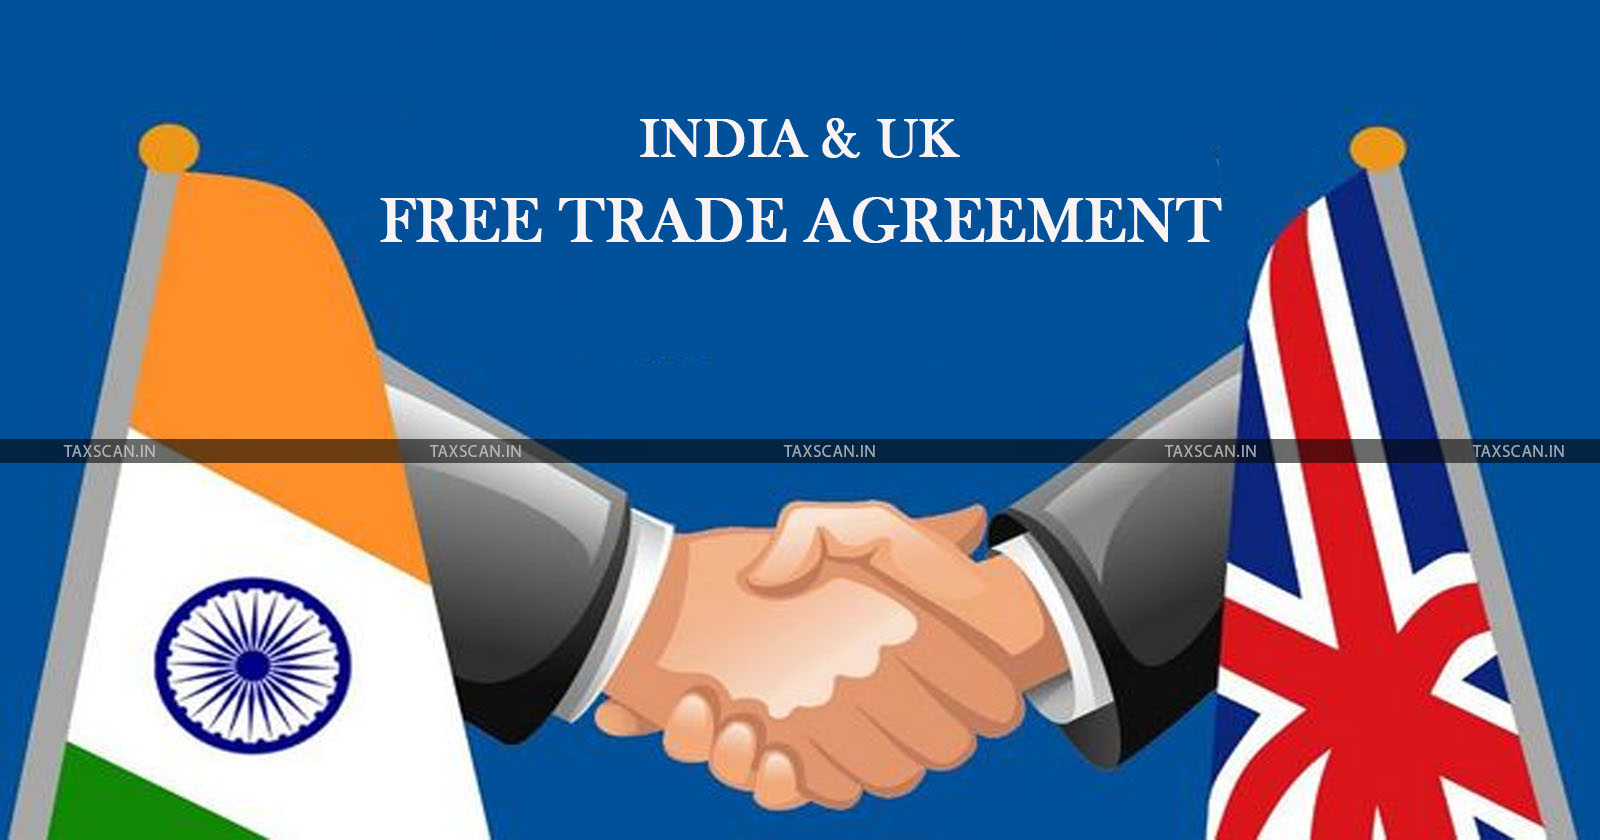 free trade agreement - Ministry of Commerce and Industry - Joint Outcome Statement - fta - Trade Agreement - TAXSCAN